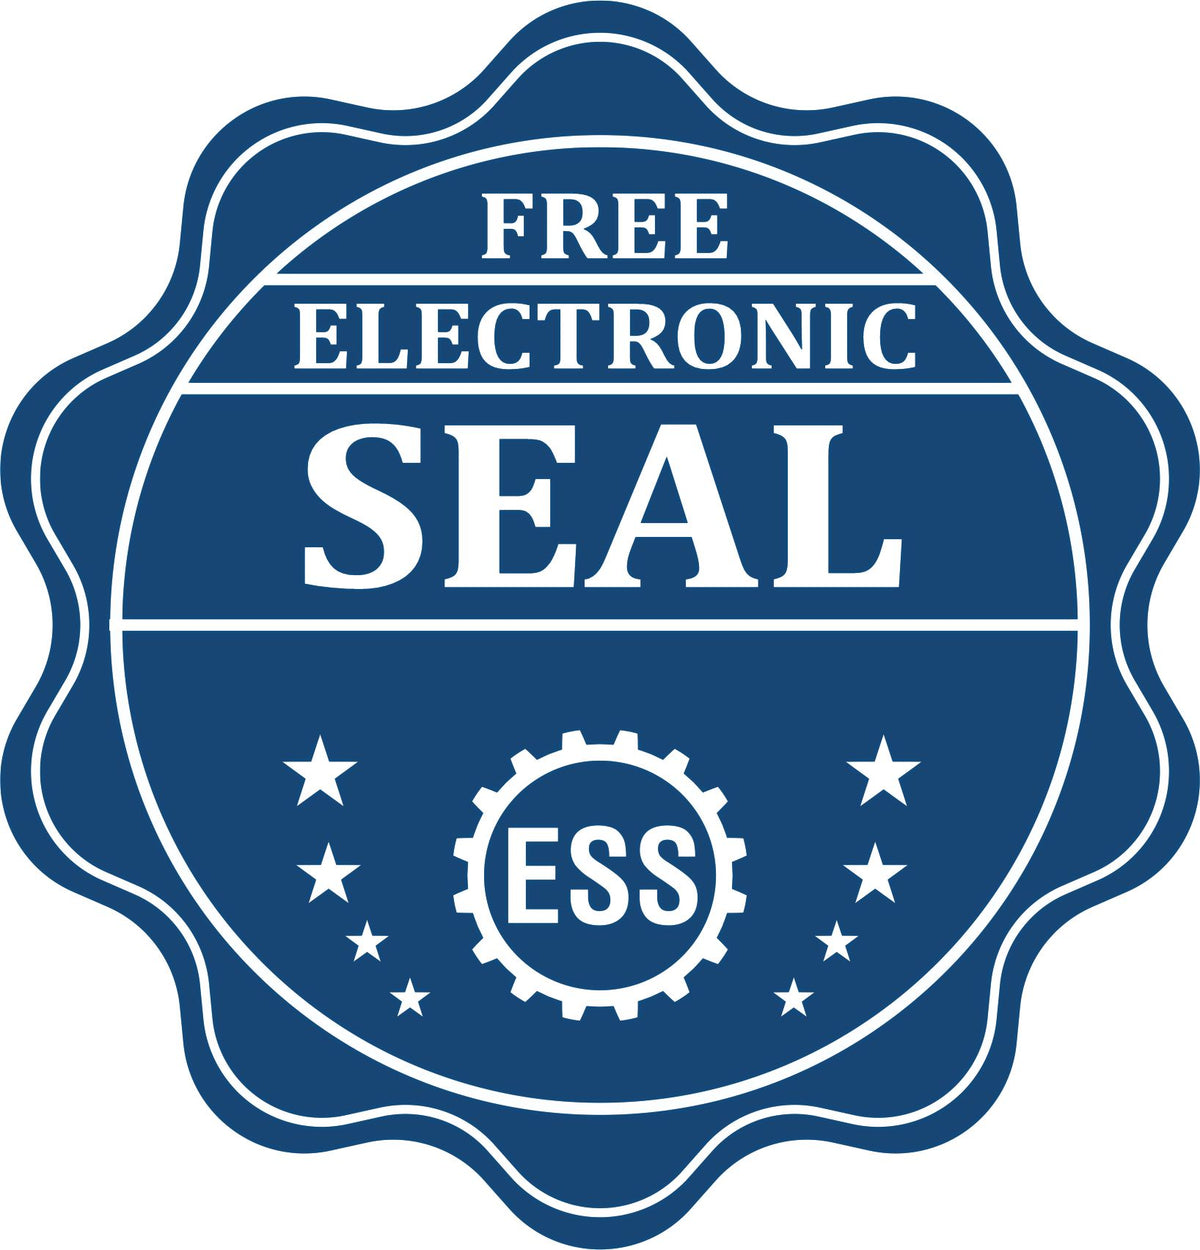 A badge showing a free electronic seal for the State of Washington Soft Land Surveyor Embossing Seal with stars and the ESS gear on the emblem.